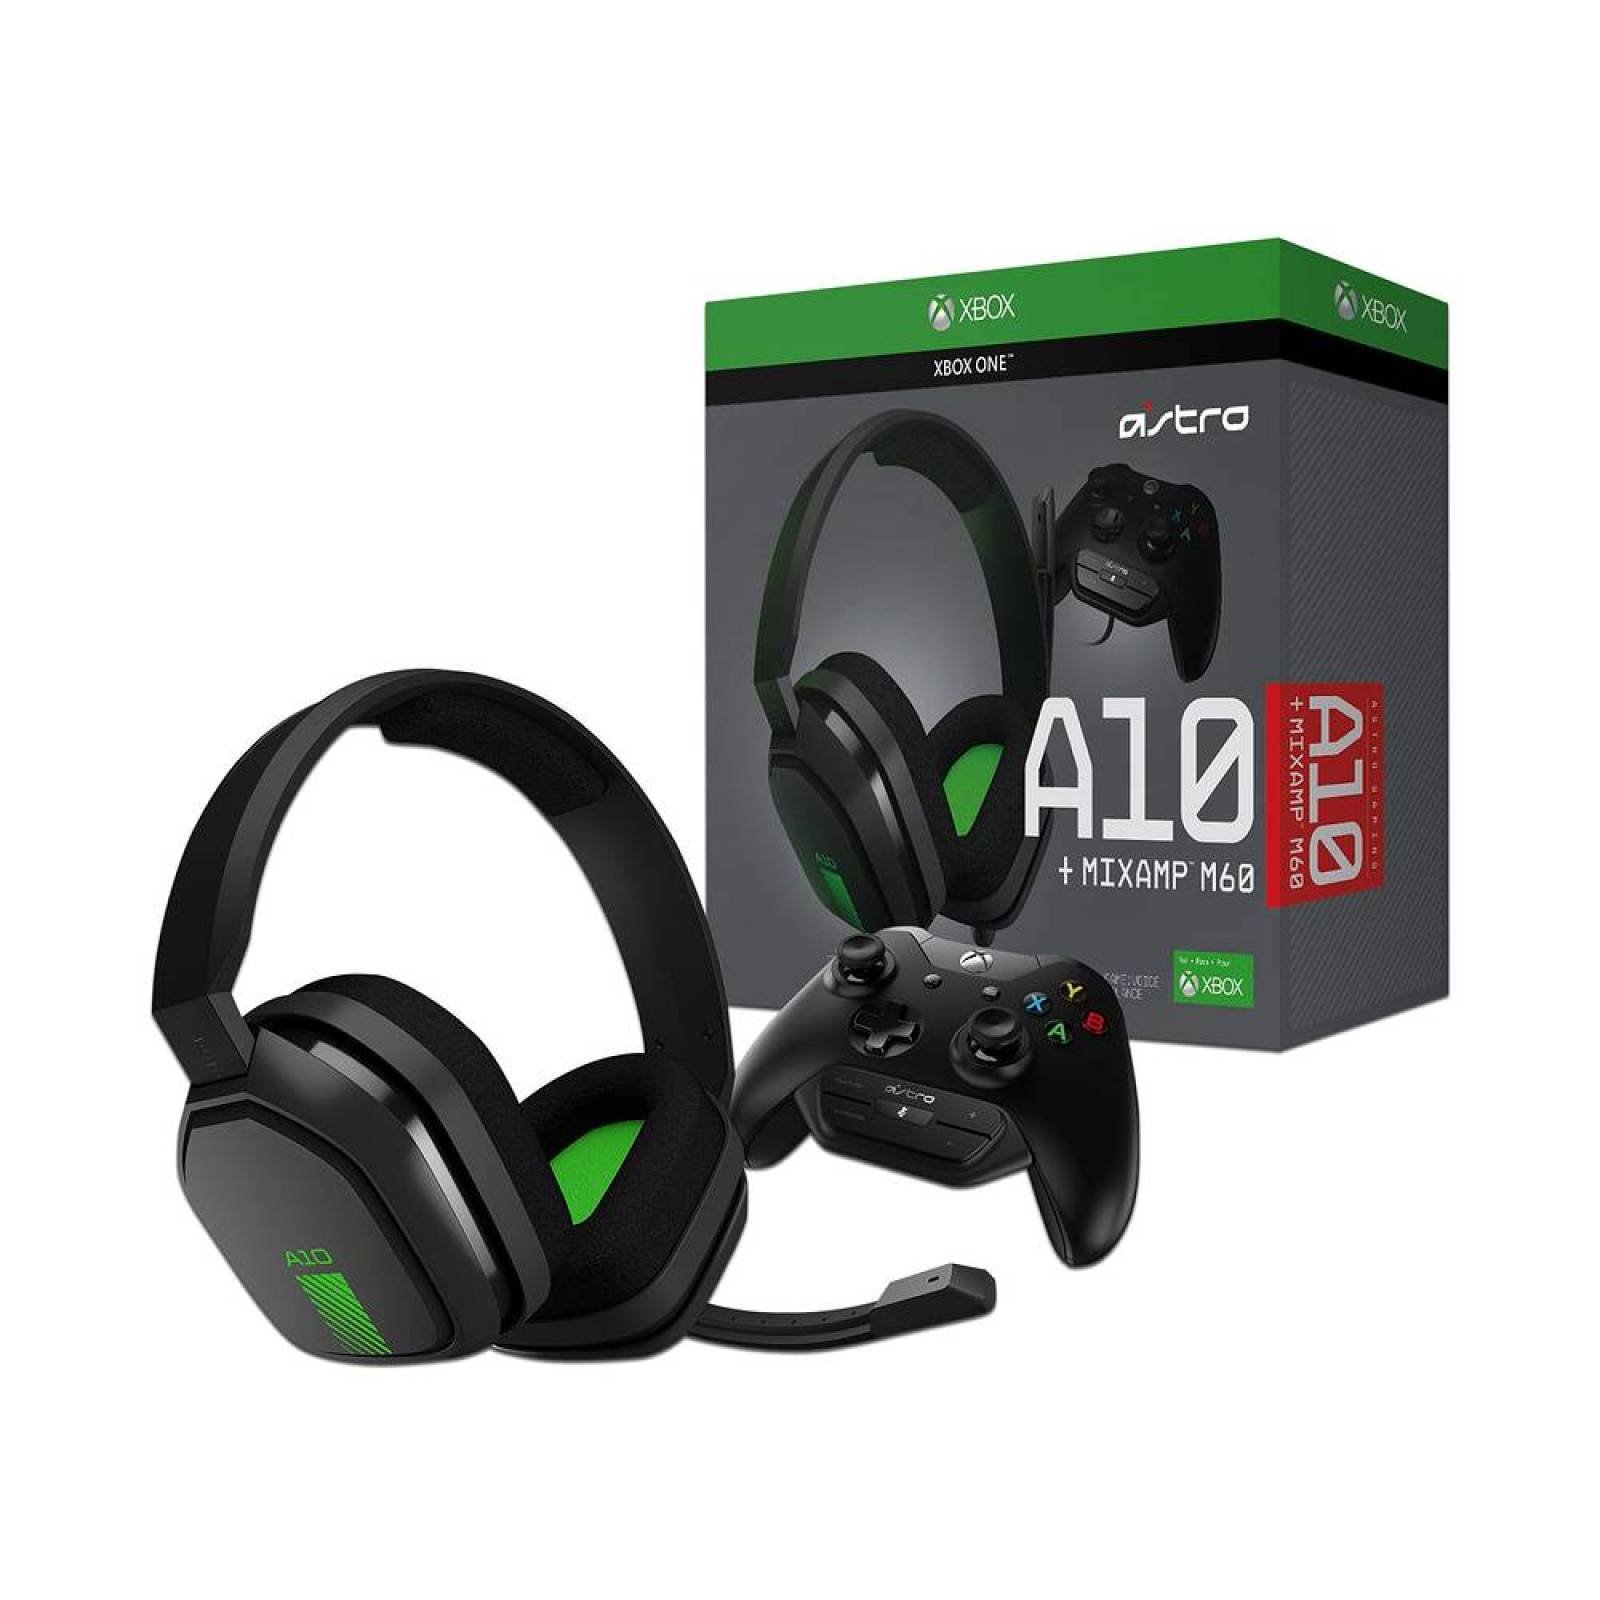 Astro A10 Xbox One Cheaper Than Retail Price Buy Clothing Accessories And Lifestyle Products For Women Men